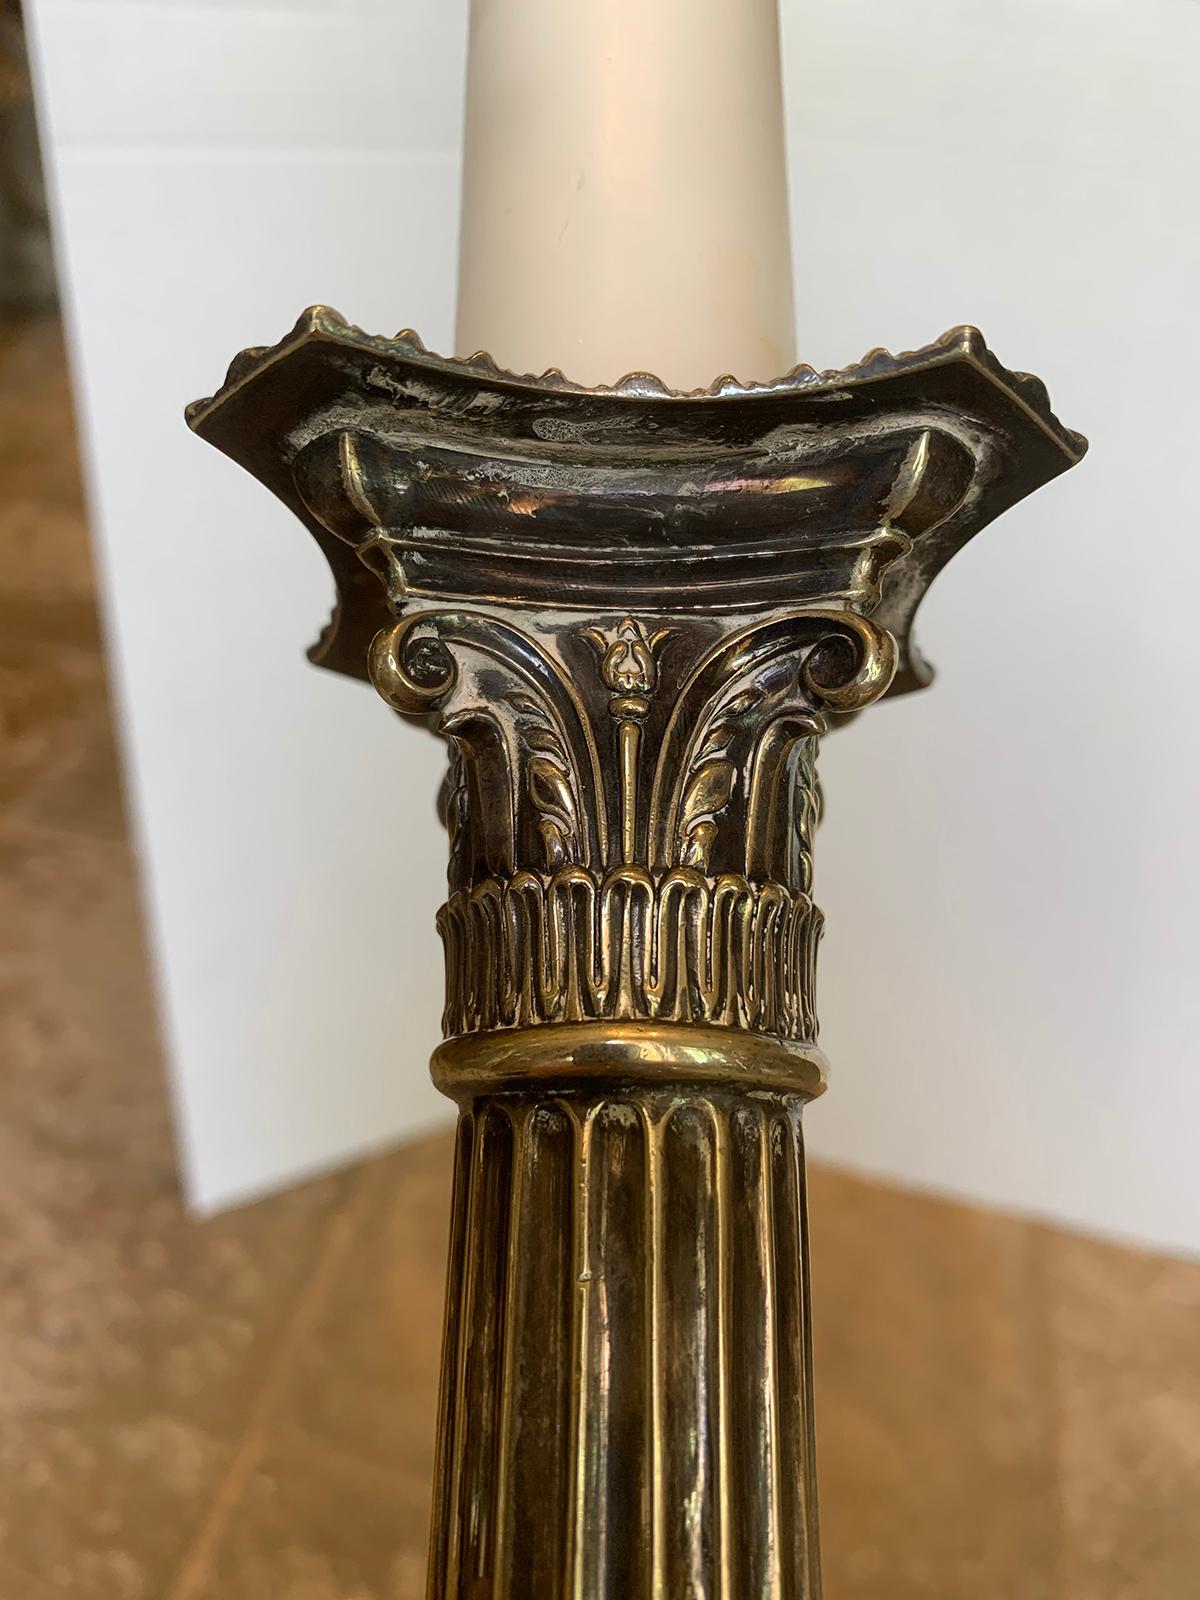 19th-20th Century English Neoclassical Silver Plate Column Candlestick Lamp For Sale 9